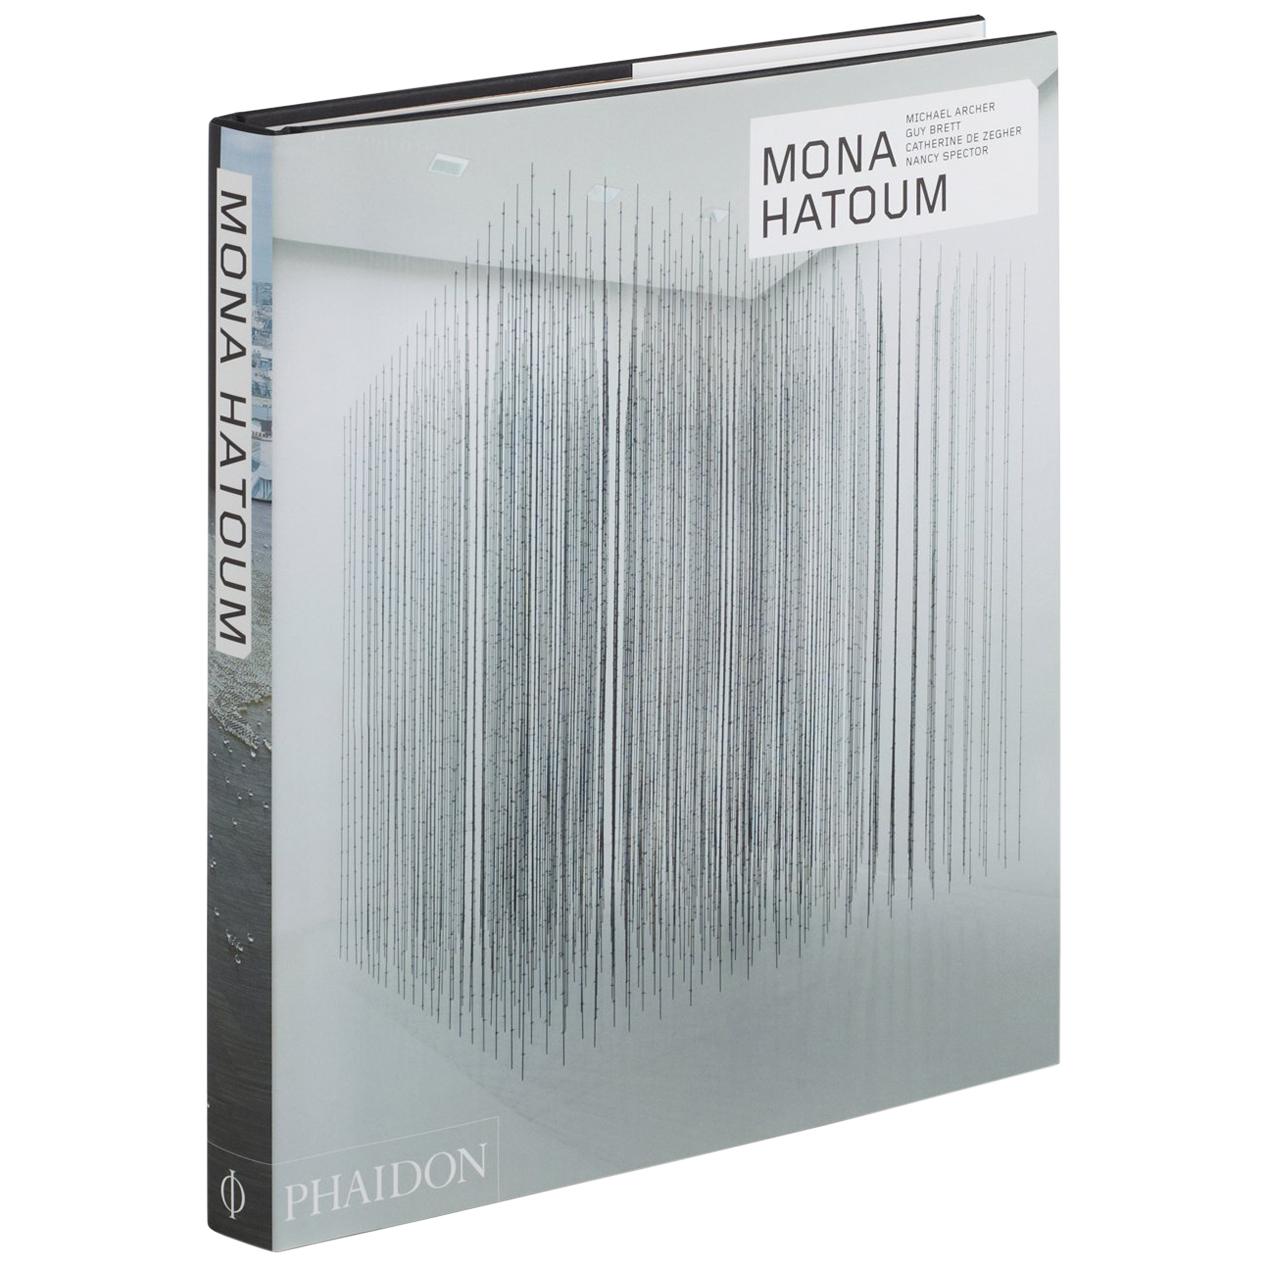 Mona Hatoum Revised and Expanded Edition (Phaidon Contemporary Artists Series)